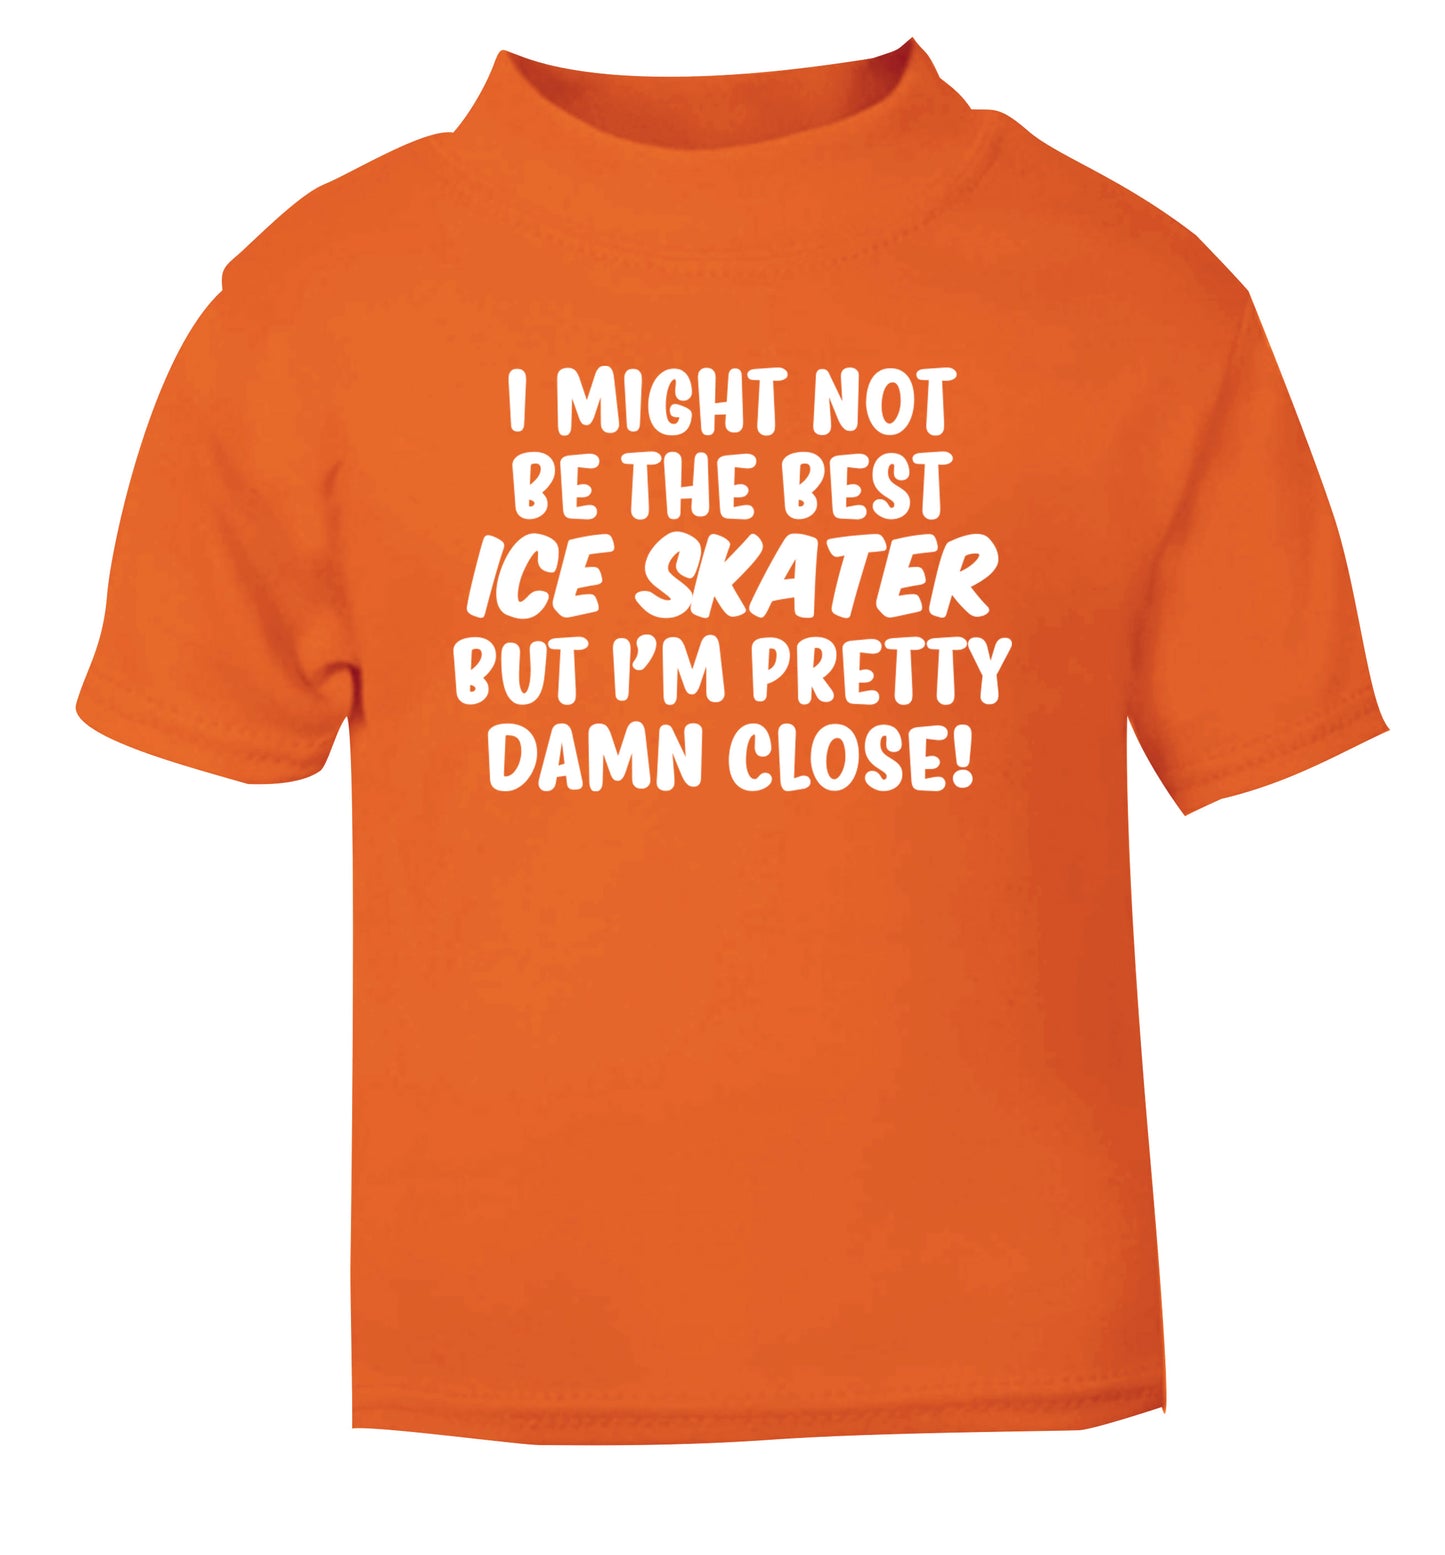 I might not be the best ice skater but I'm pretty damn close! orange Baby Toddler Tshirt 2 Years